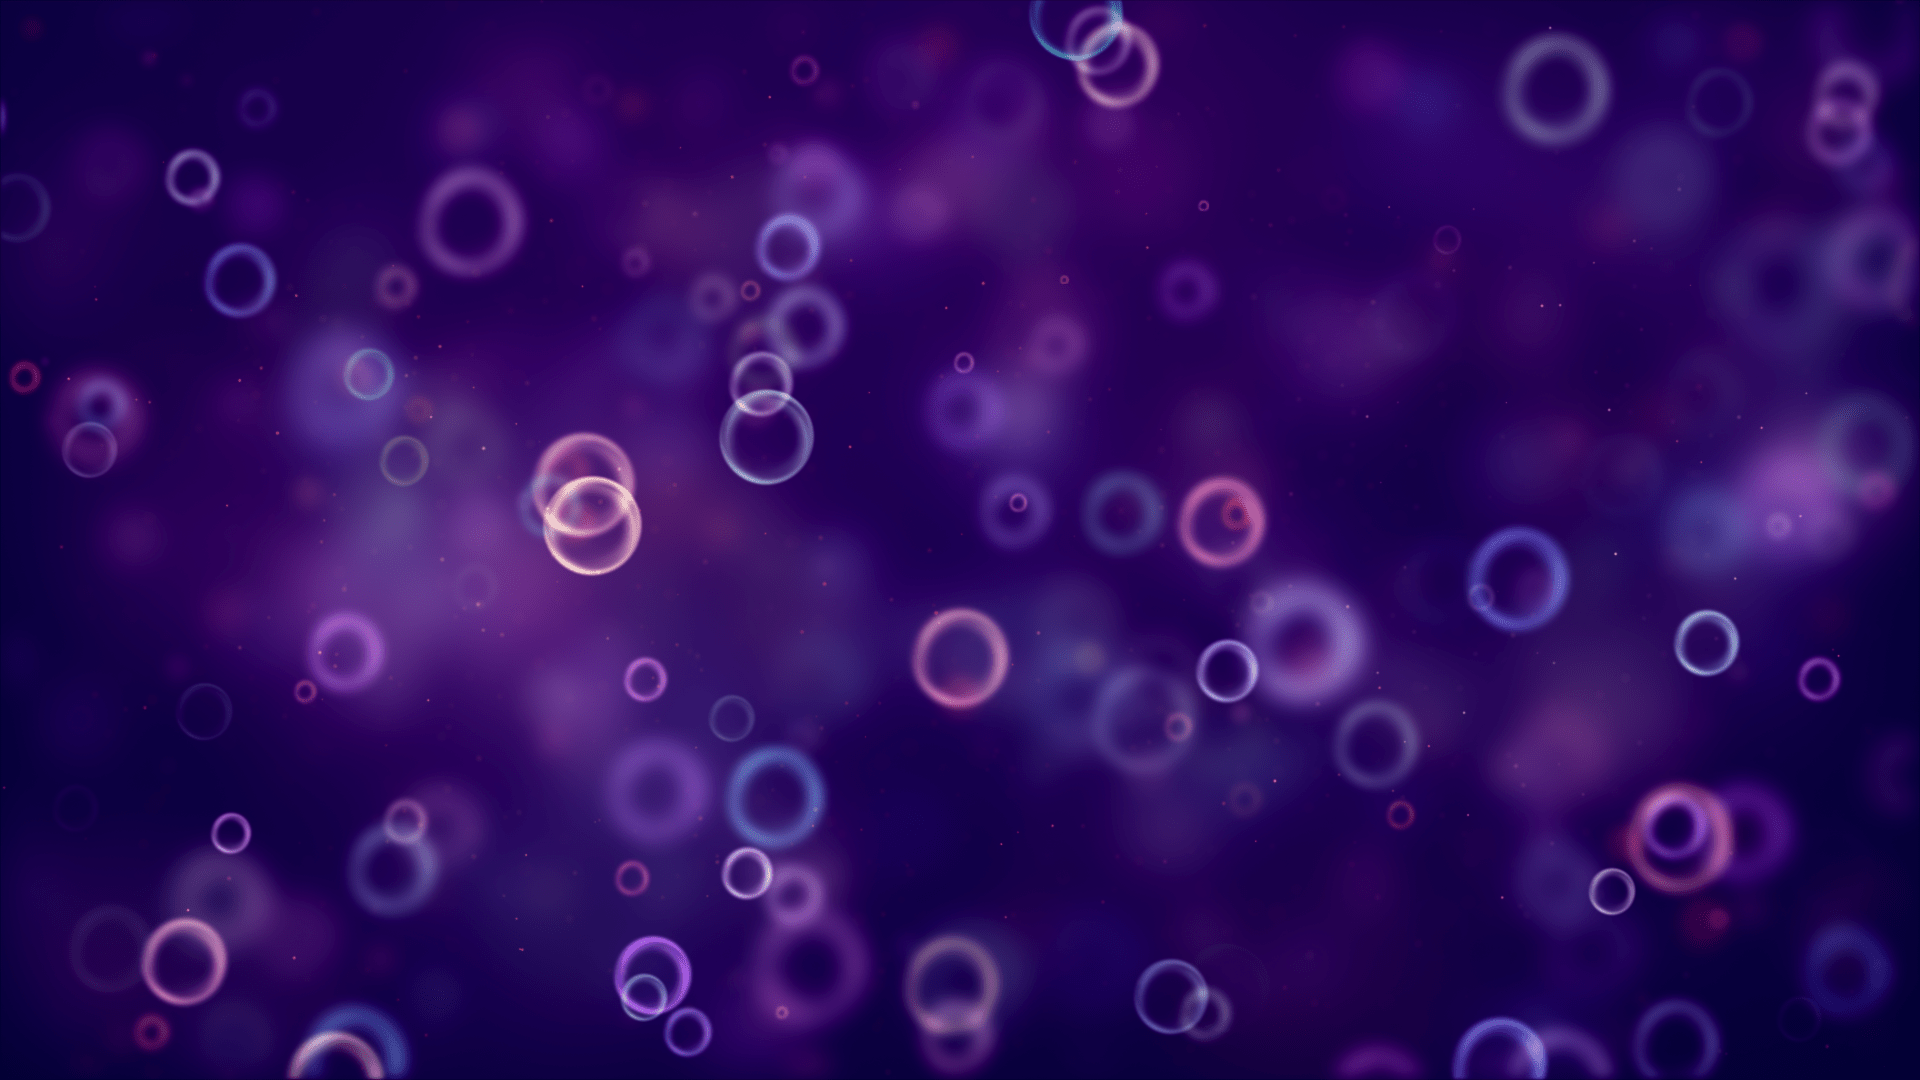 A purple abstract image with pink and blue bubbles. - Bubbles